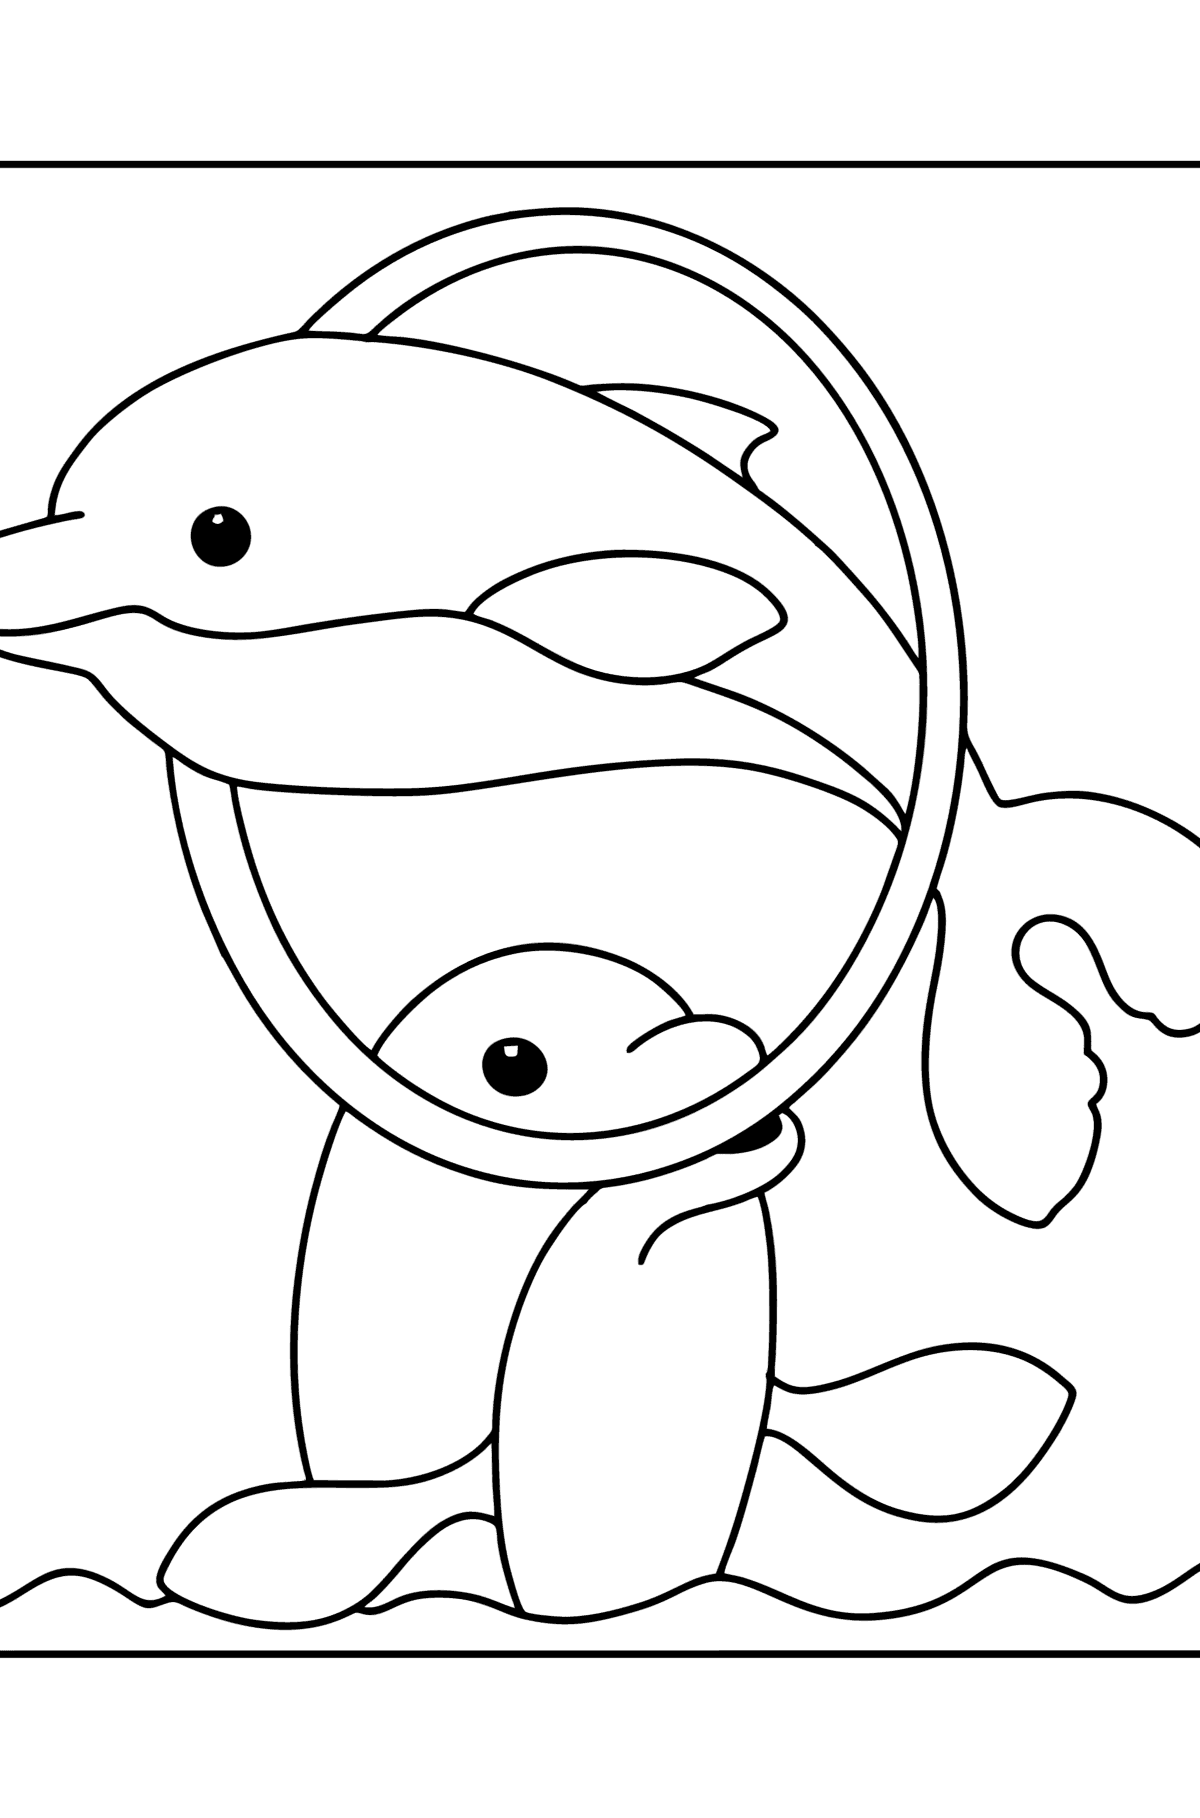 Dolphins in Water coloring page - Coloring Pages for Kids